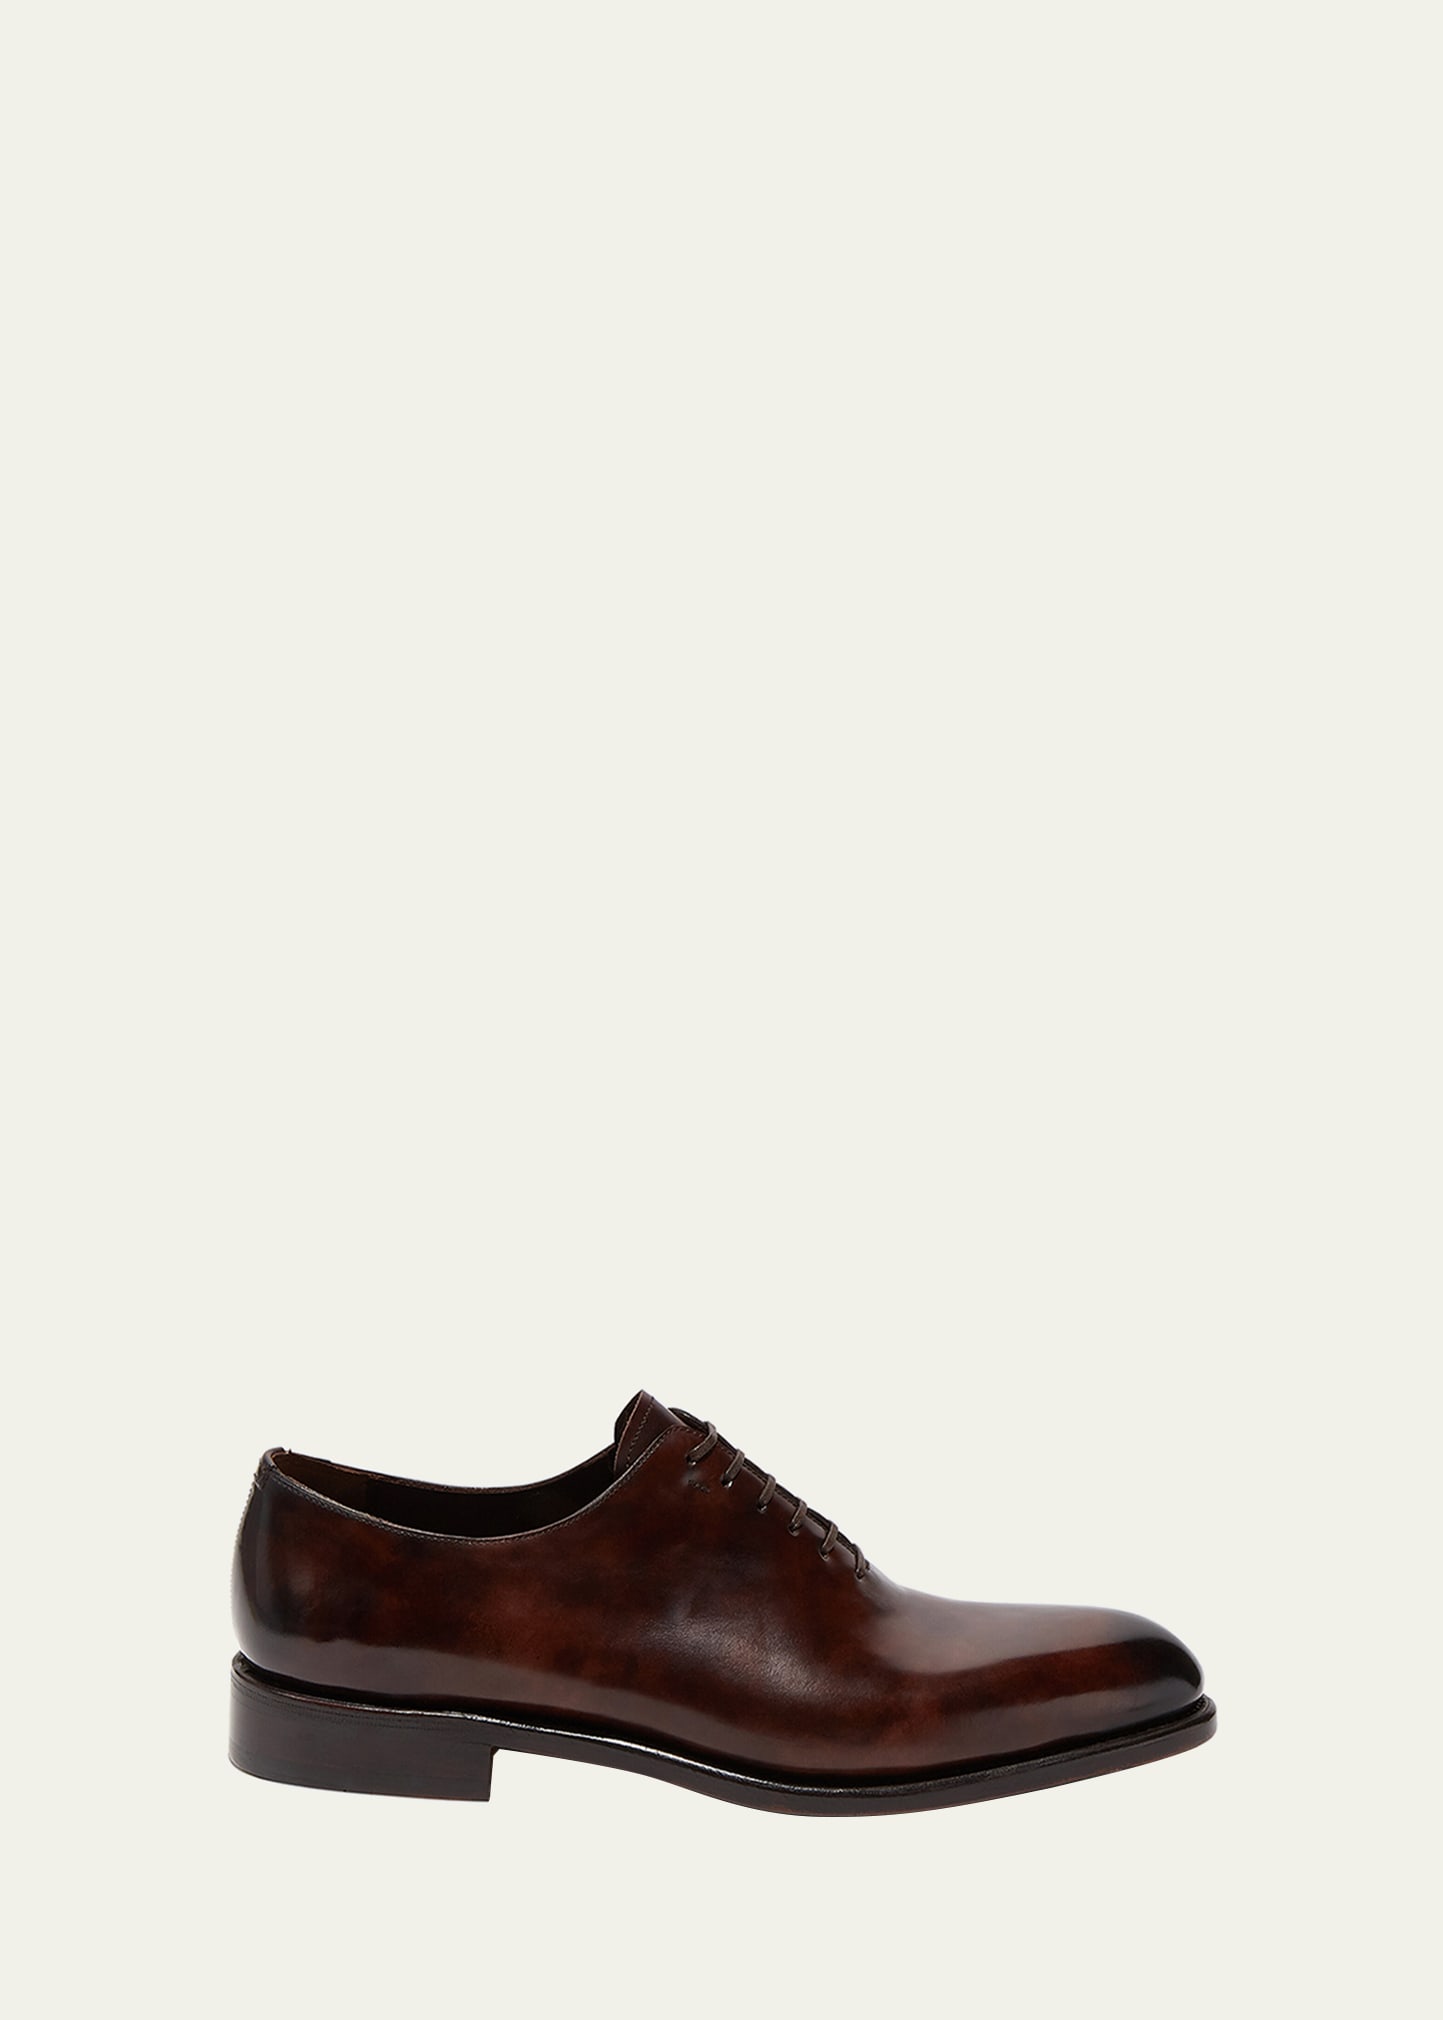 Men's Angiolo Tramezza Whole-Cut Leather Lace-Up Shoes